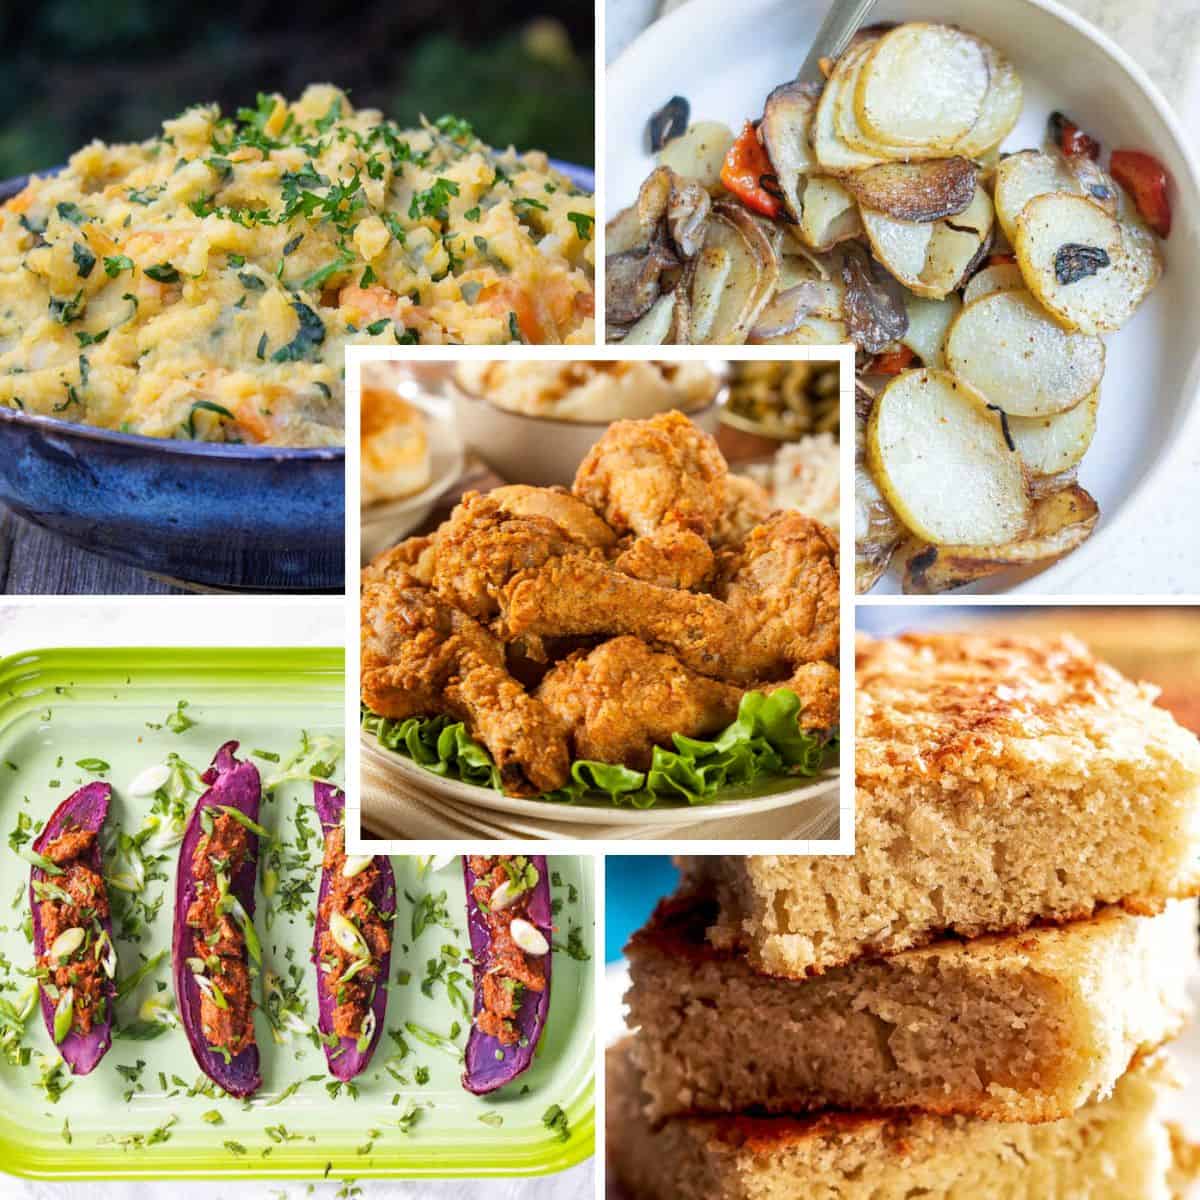 What To Serve With Fried Chicken: 21 Best Side Dishes